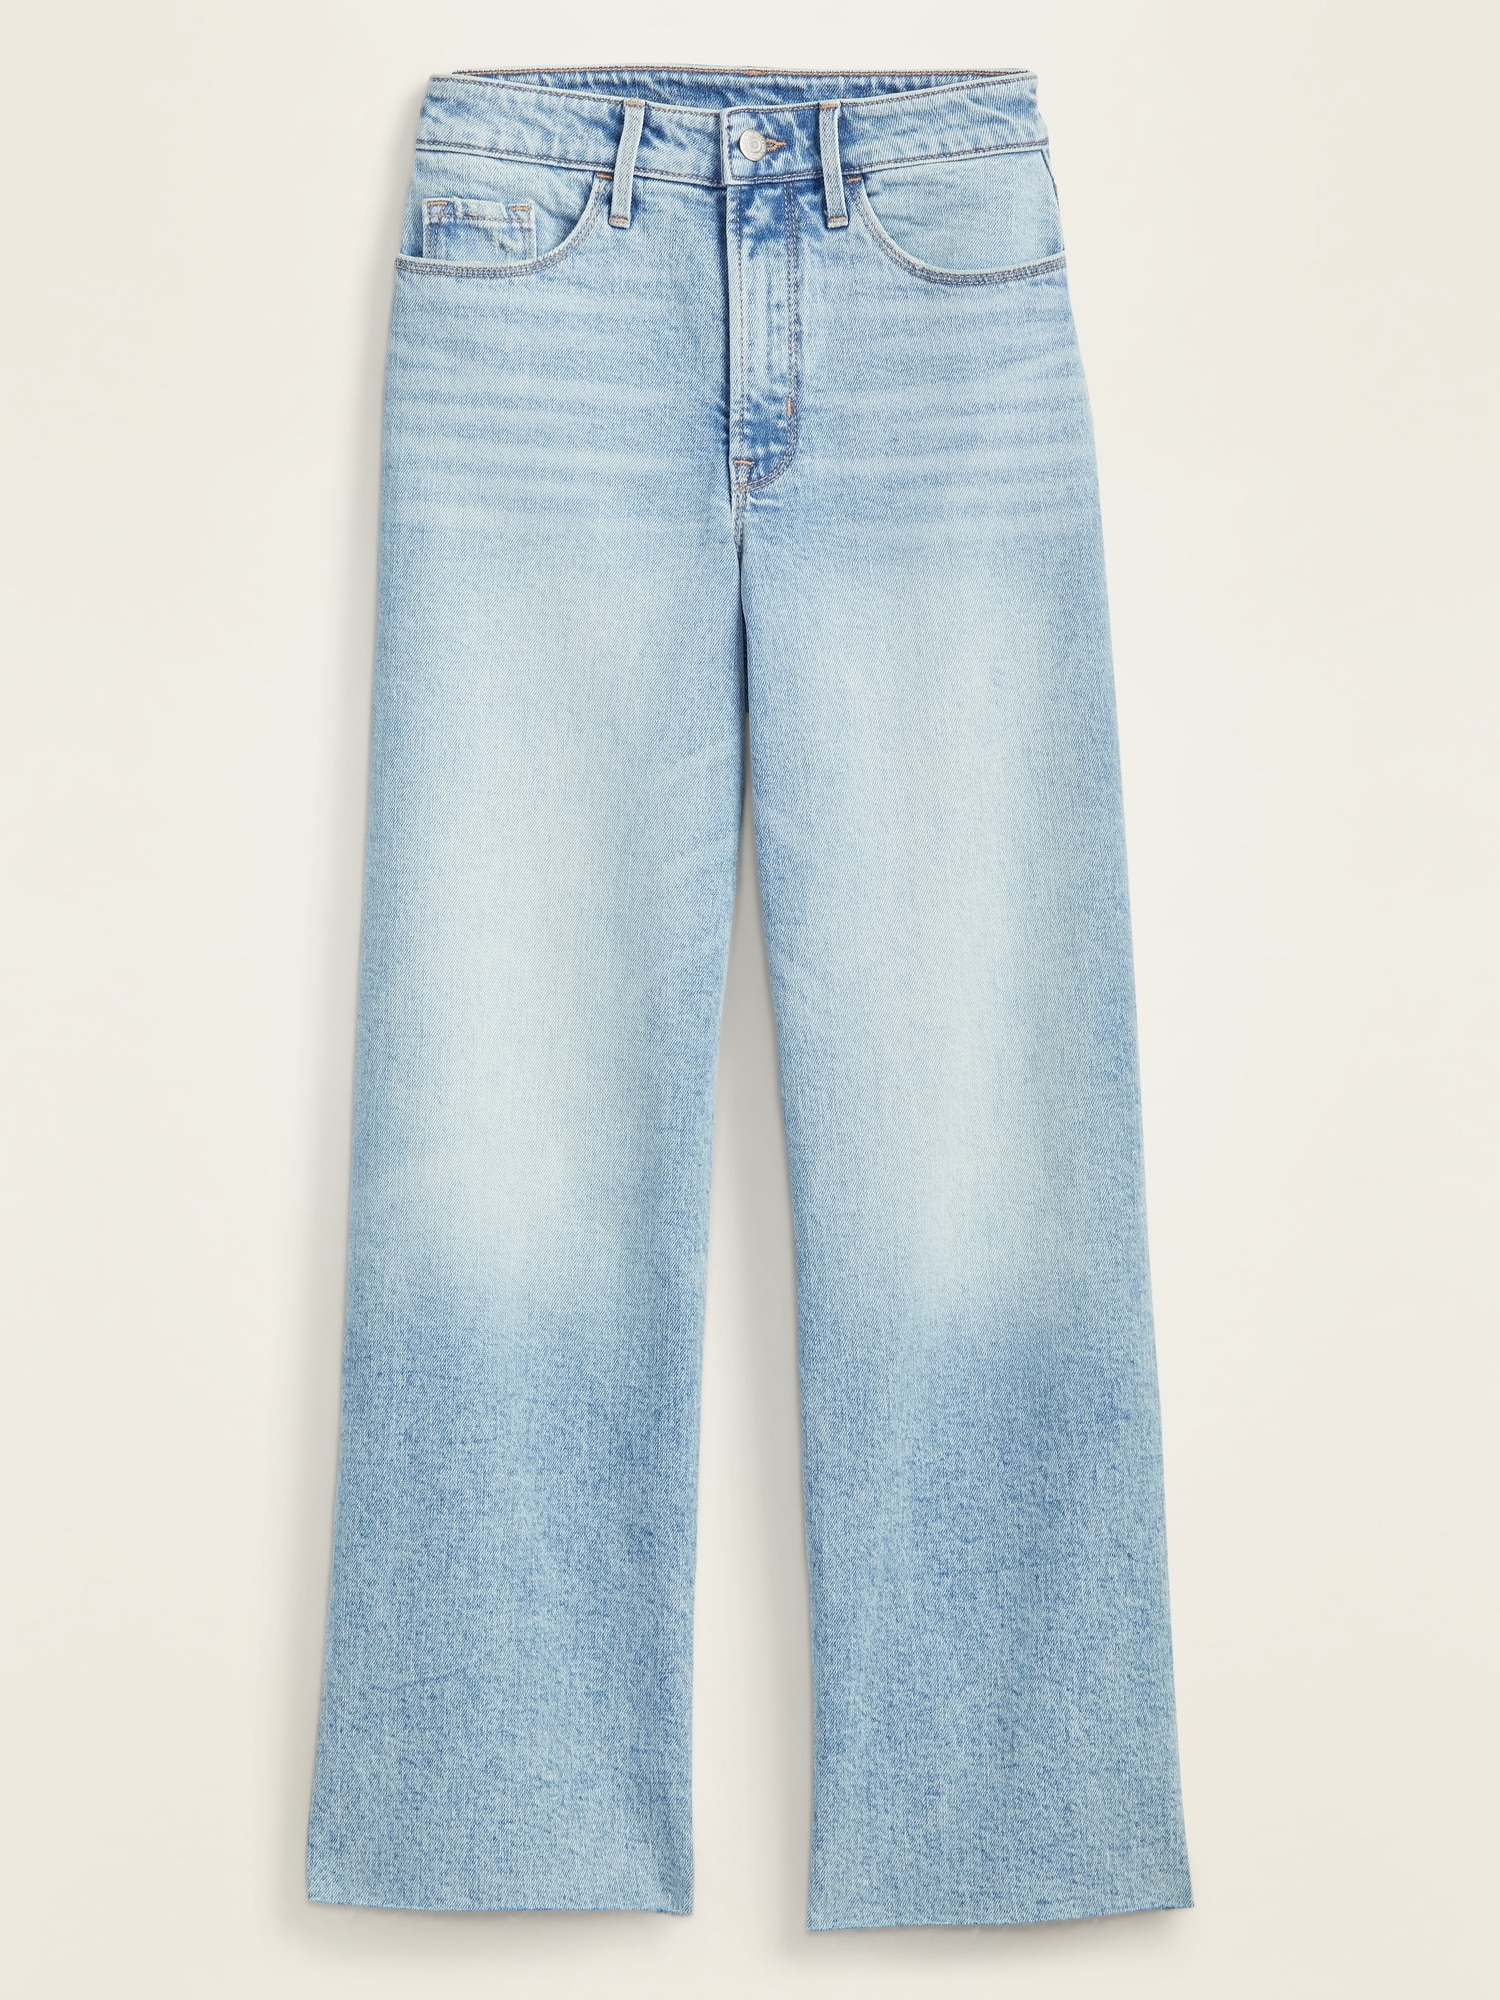 high rise wide leg jeans old navy